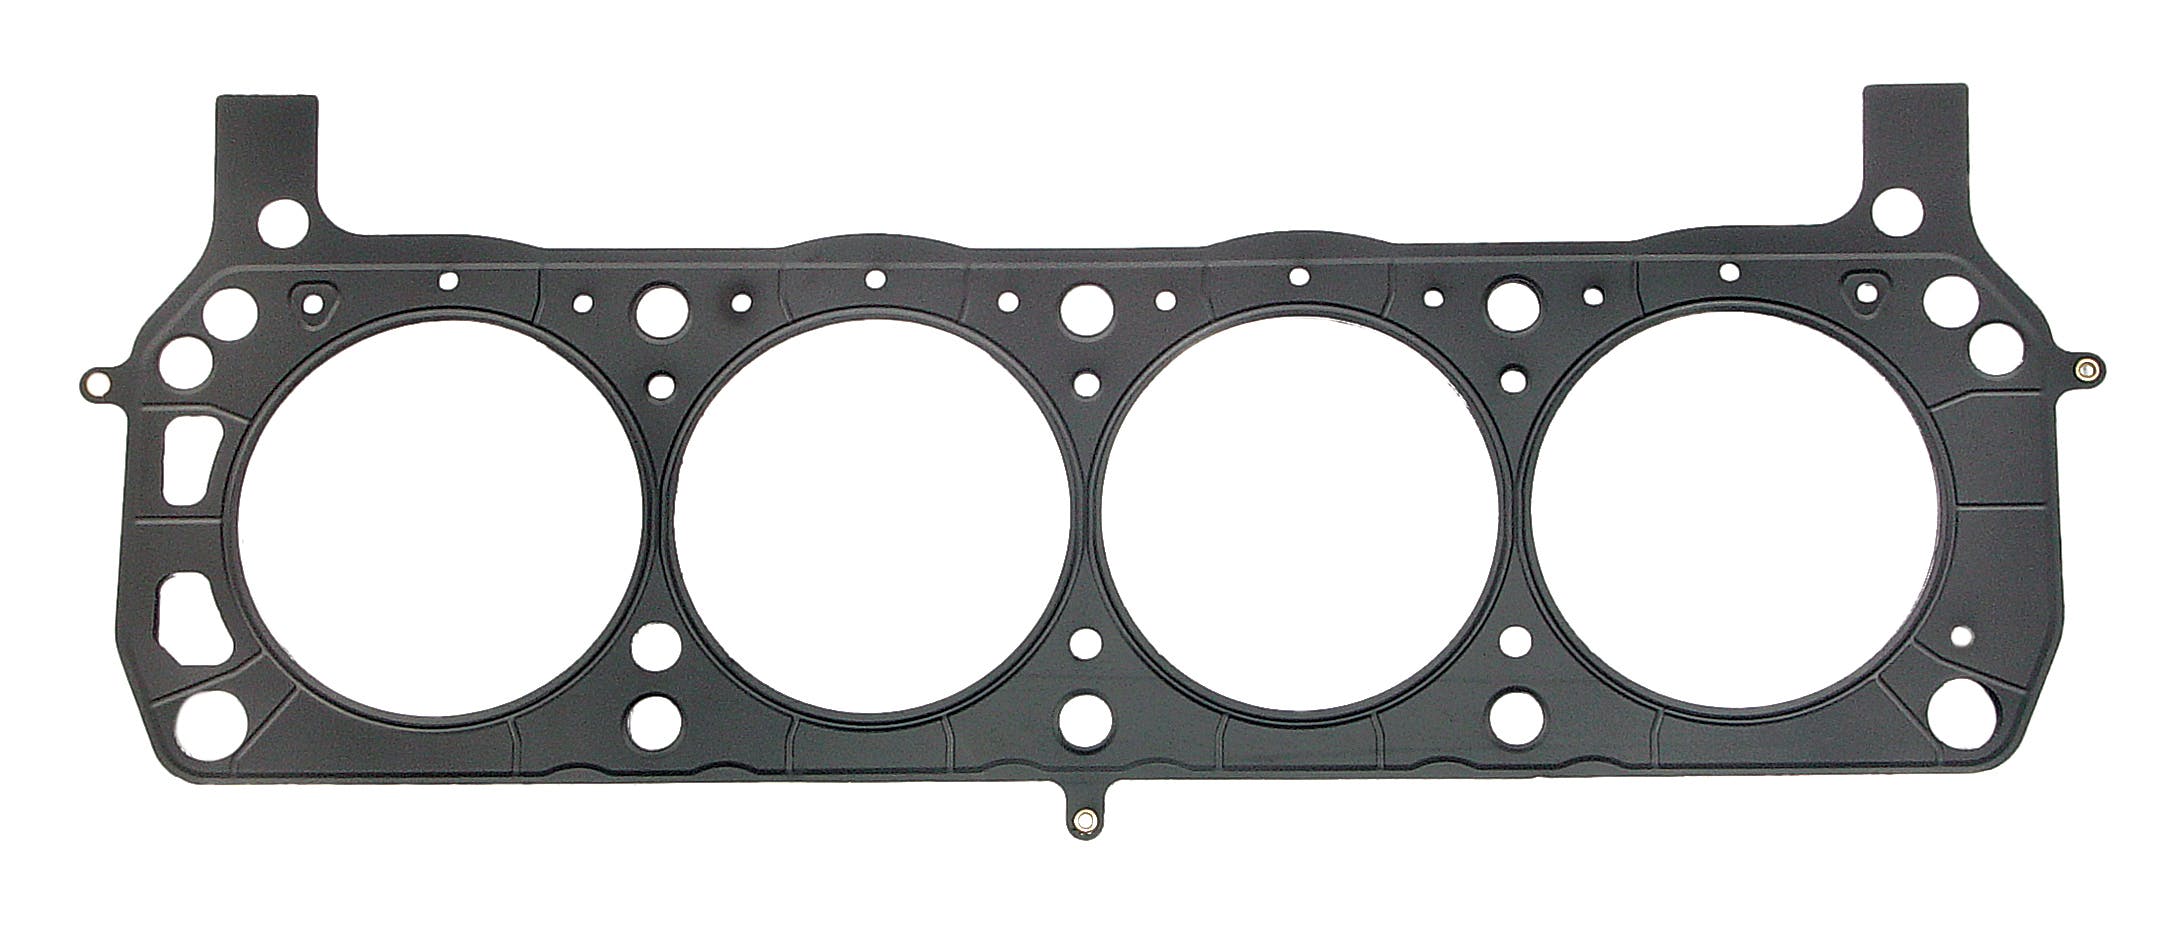 Percy 68012 XX Carbon 1.5 Square Port Header Gasket 